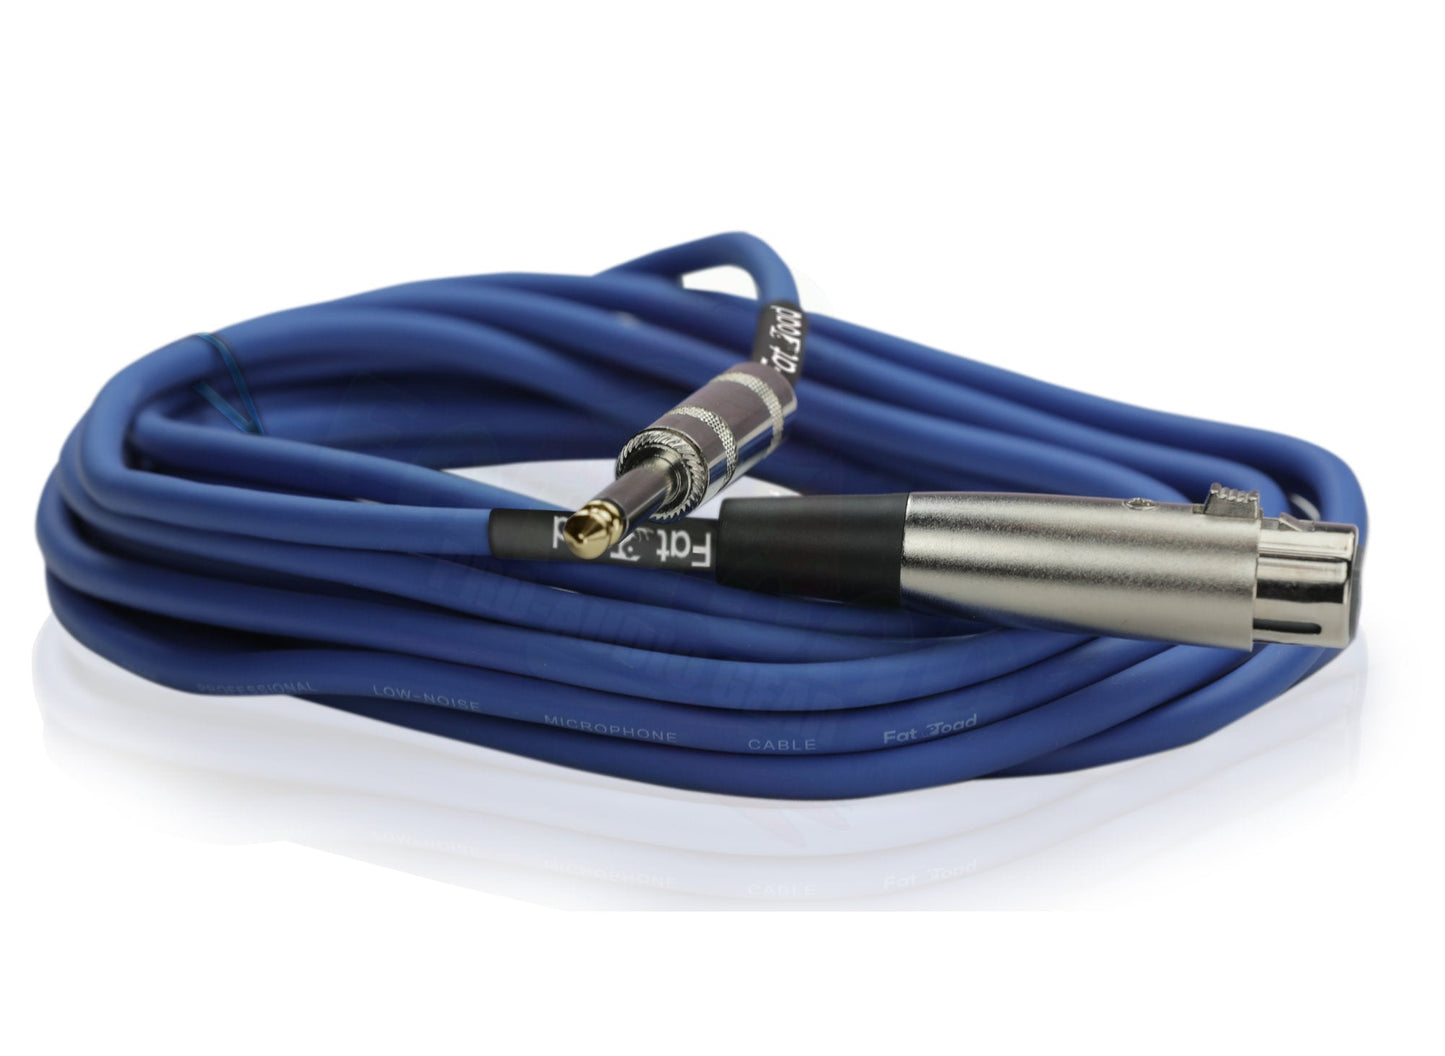 XLR Female to 1/4" Male Jack Microphone Cables (4 Pack) by FAT TOAD - 20ft Pro Audio Blue Mic Cord